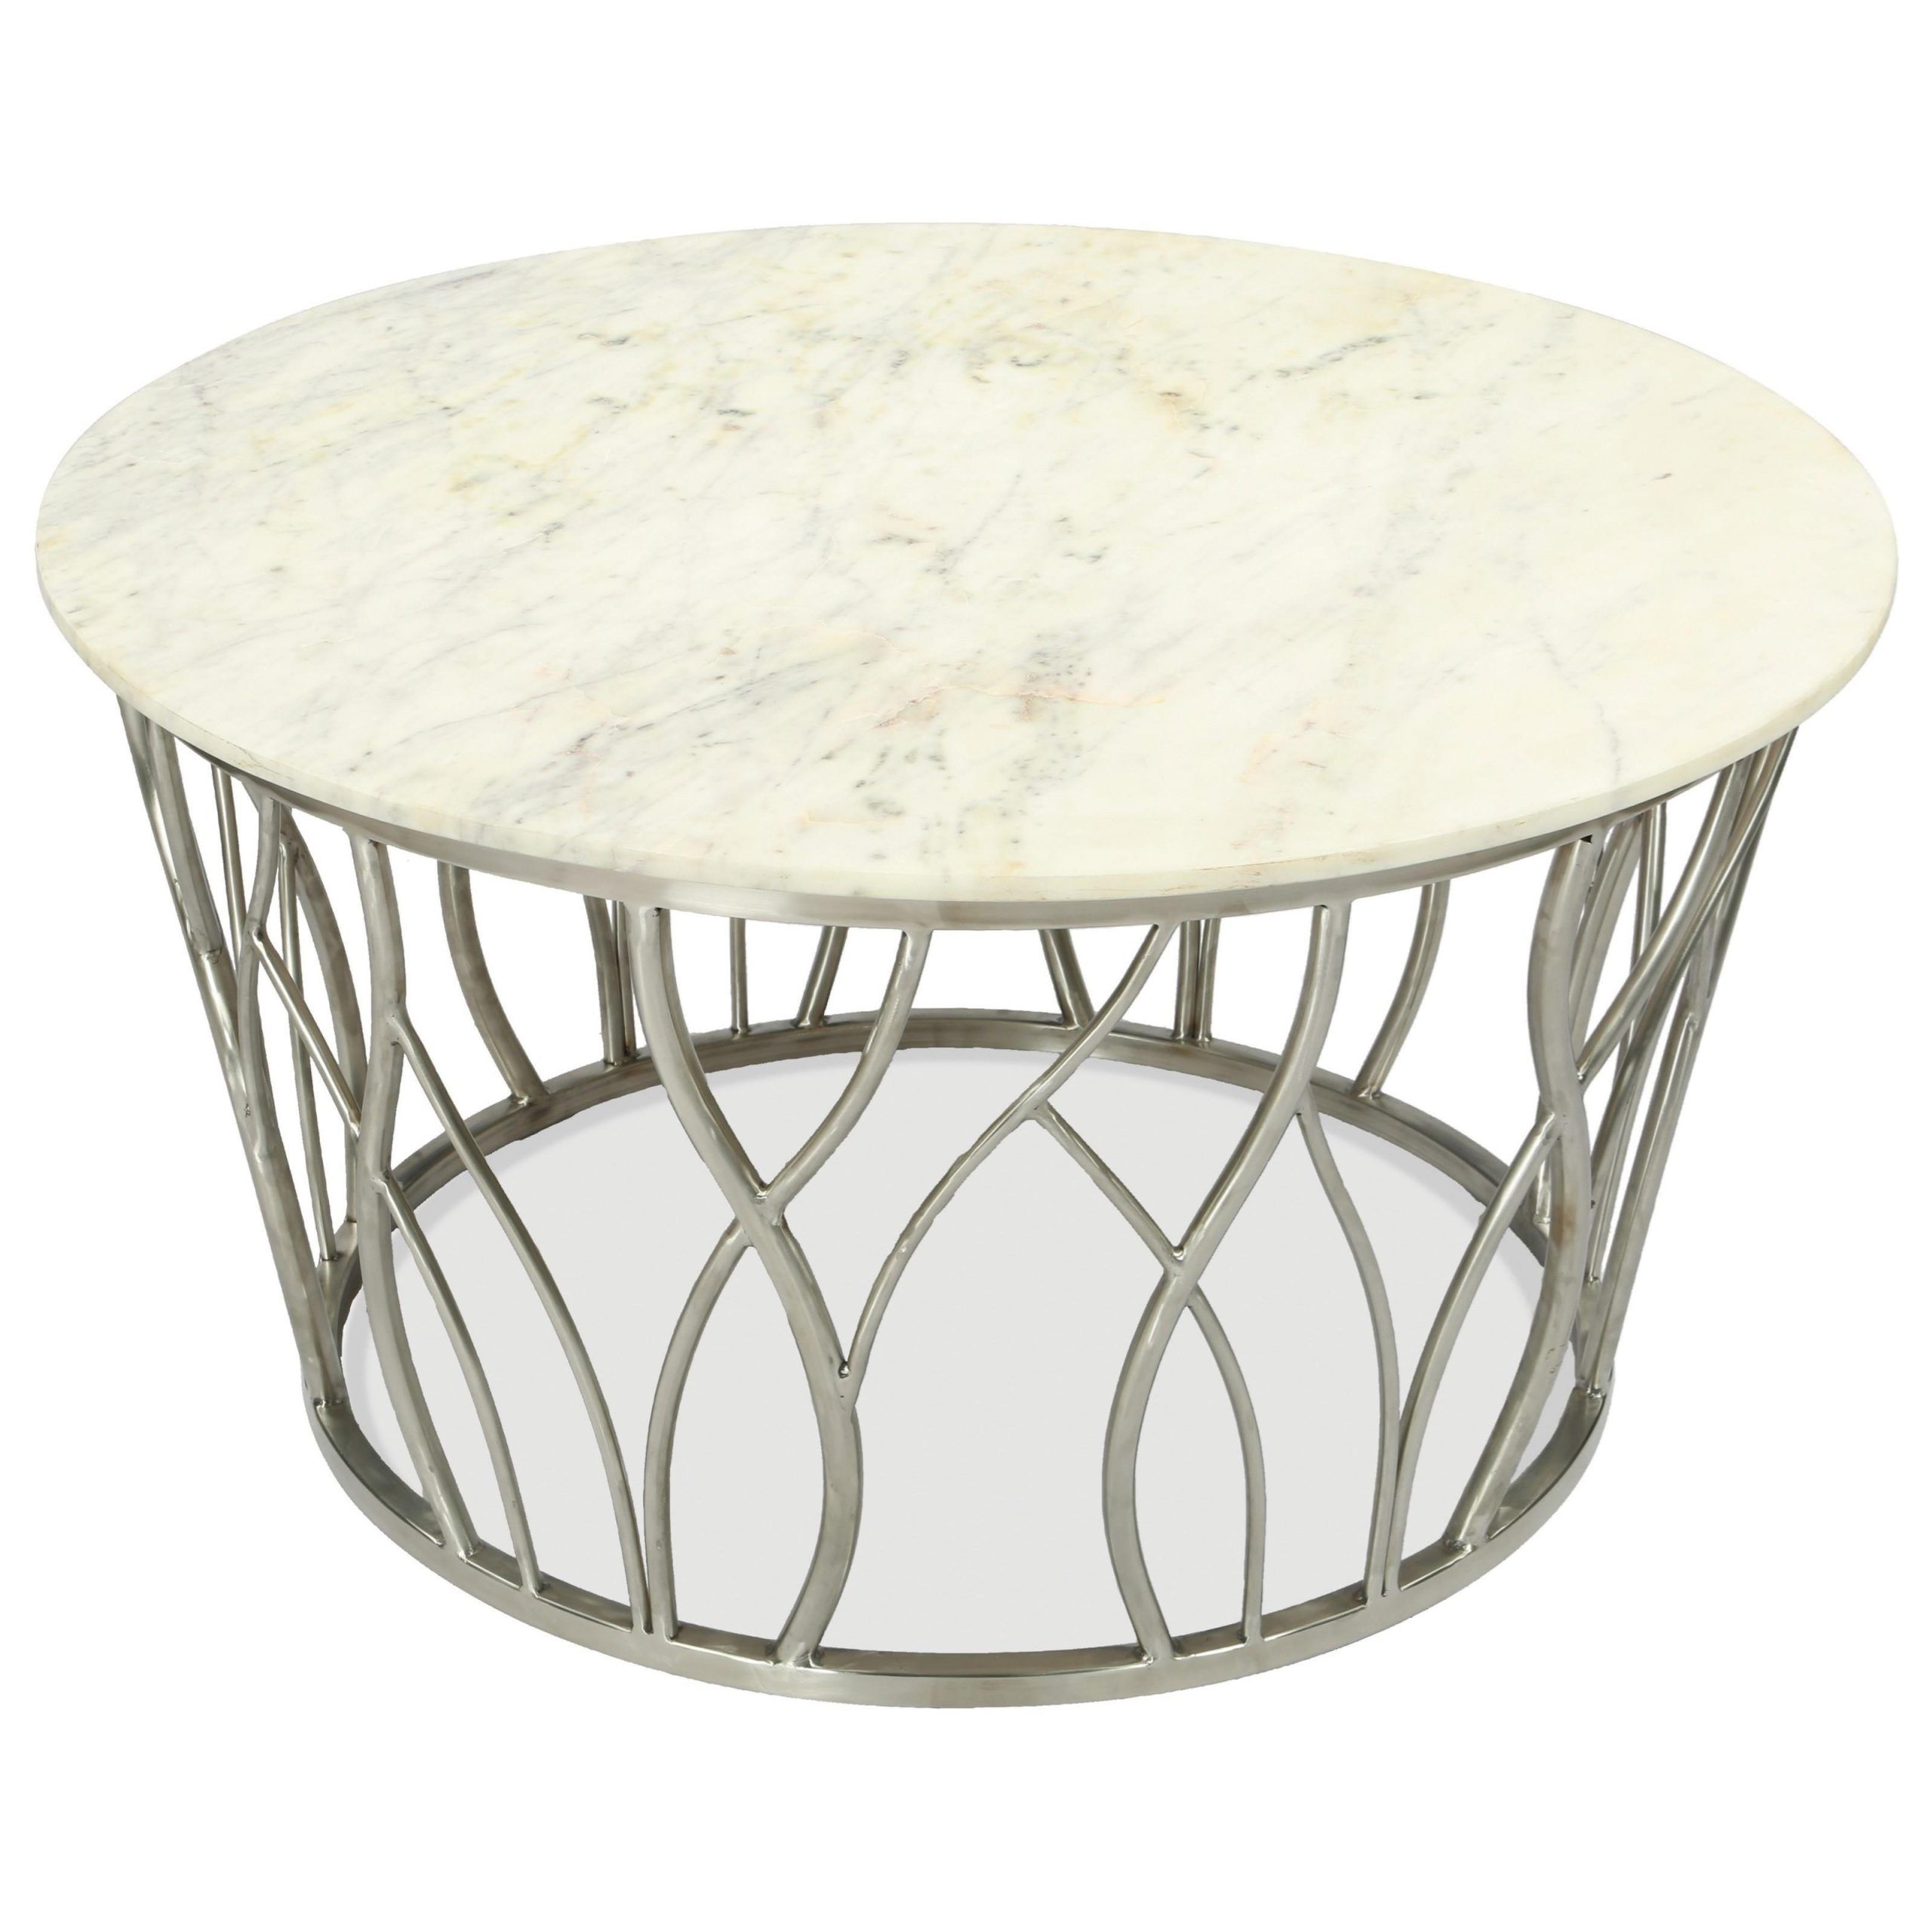 Riverside Furniture Ulysses 53702 Transitional Round Throughout Marble Top Coffee Tables (View 12 of 15)